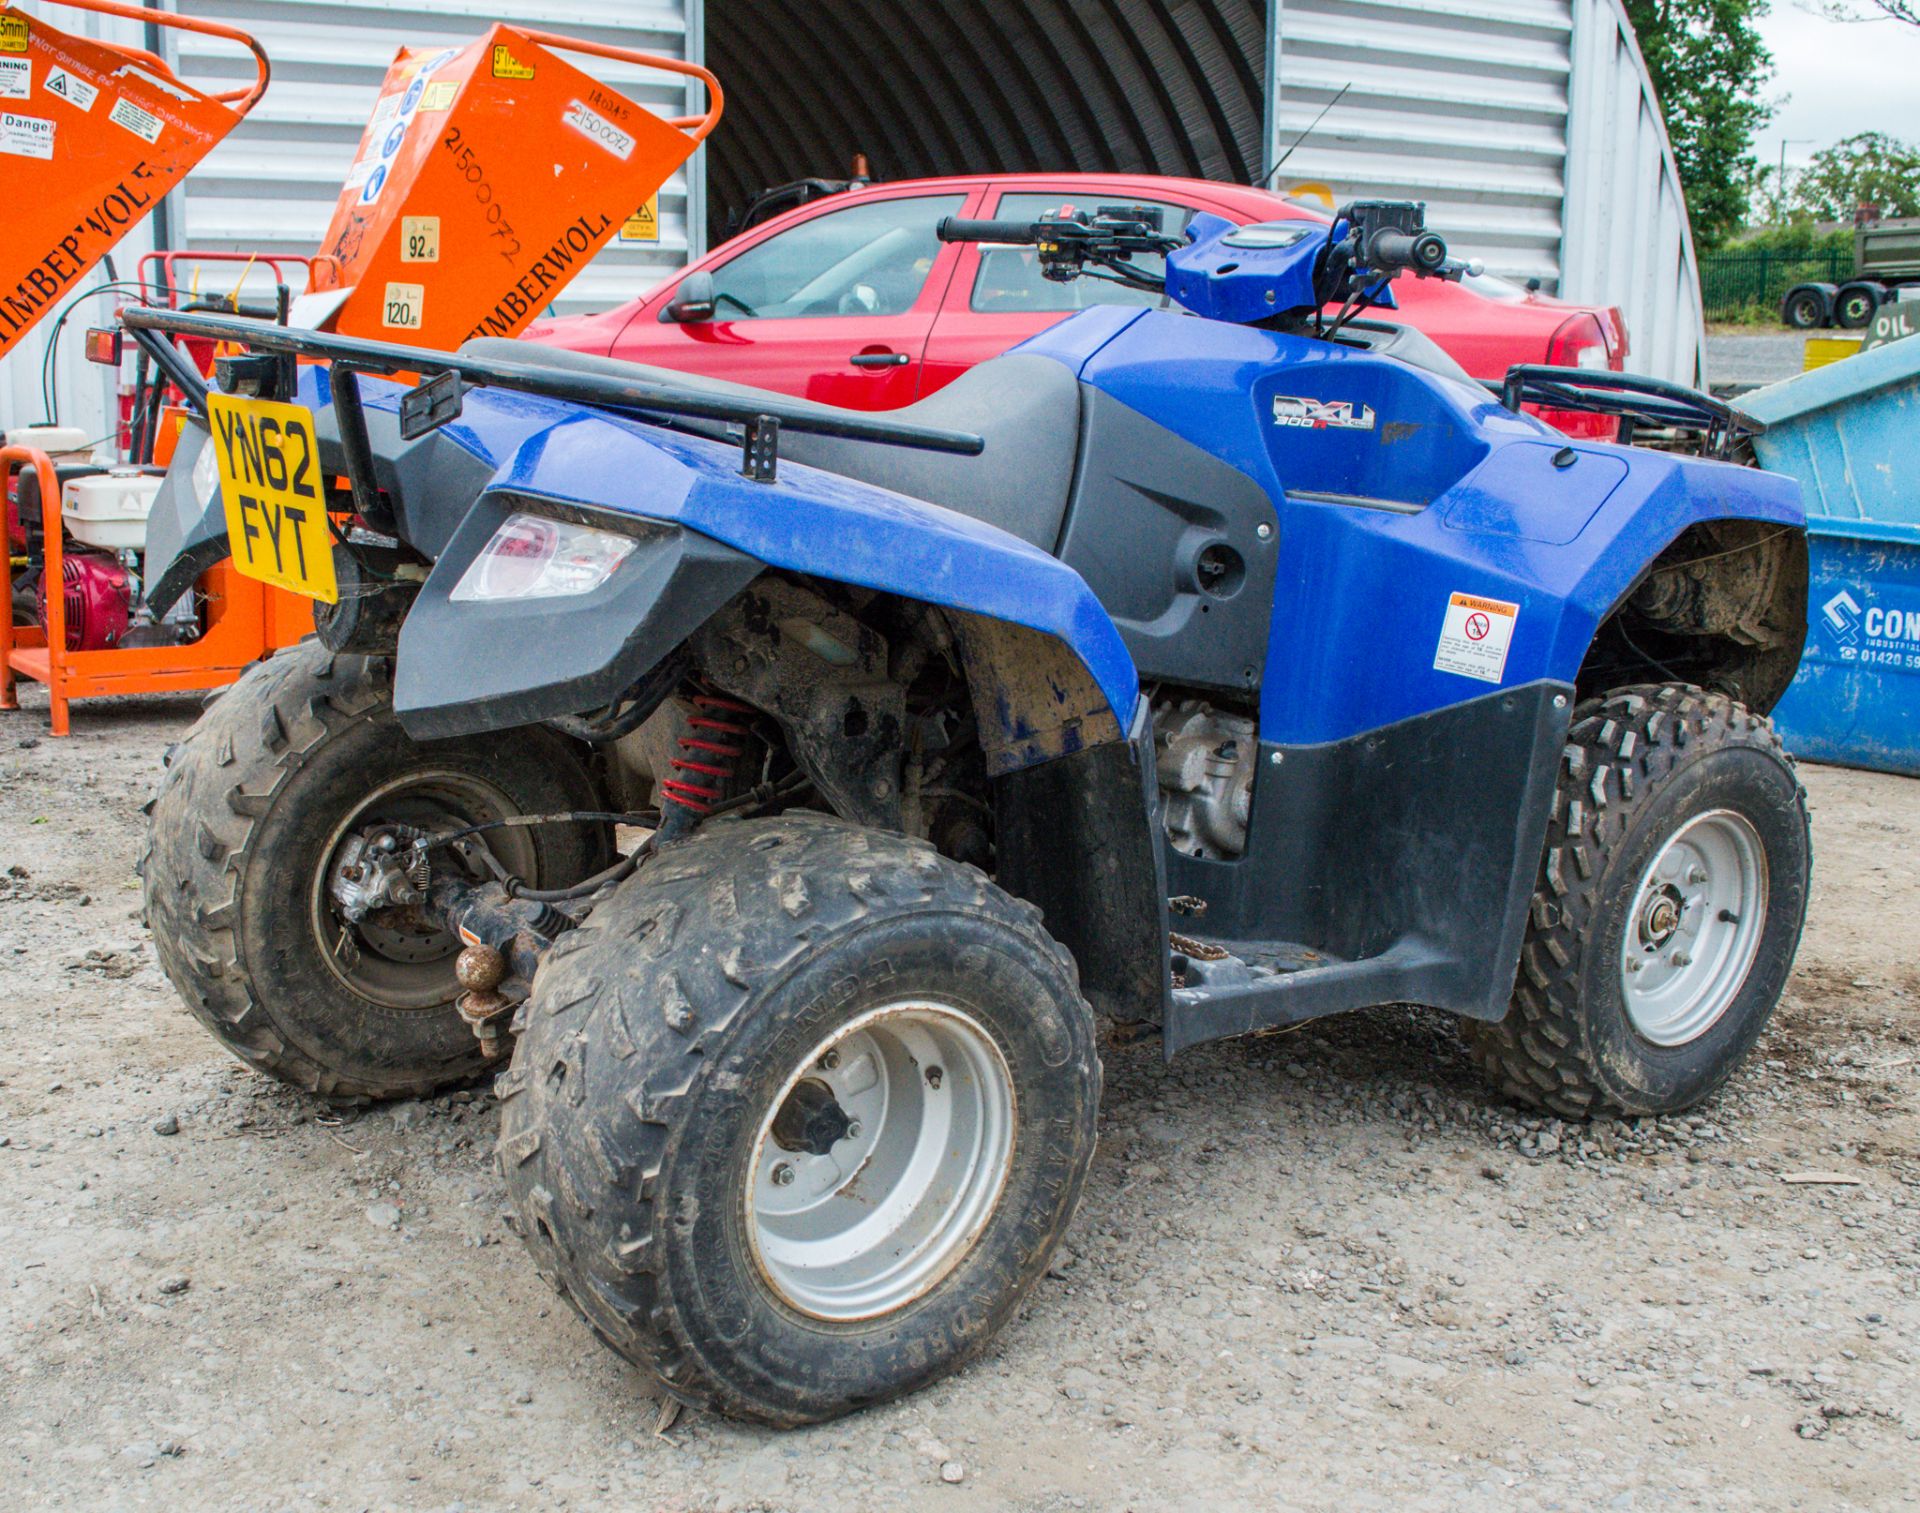 Kymco MXU 300R petrol quad bike YN62 FYT ** Parts missing and not starting ** - Image 2 of 4